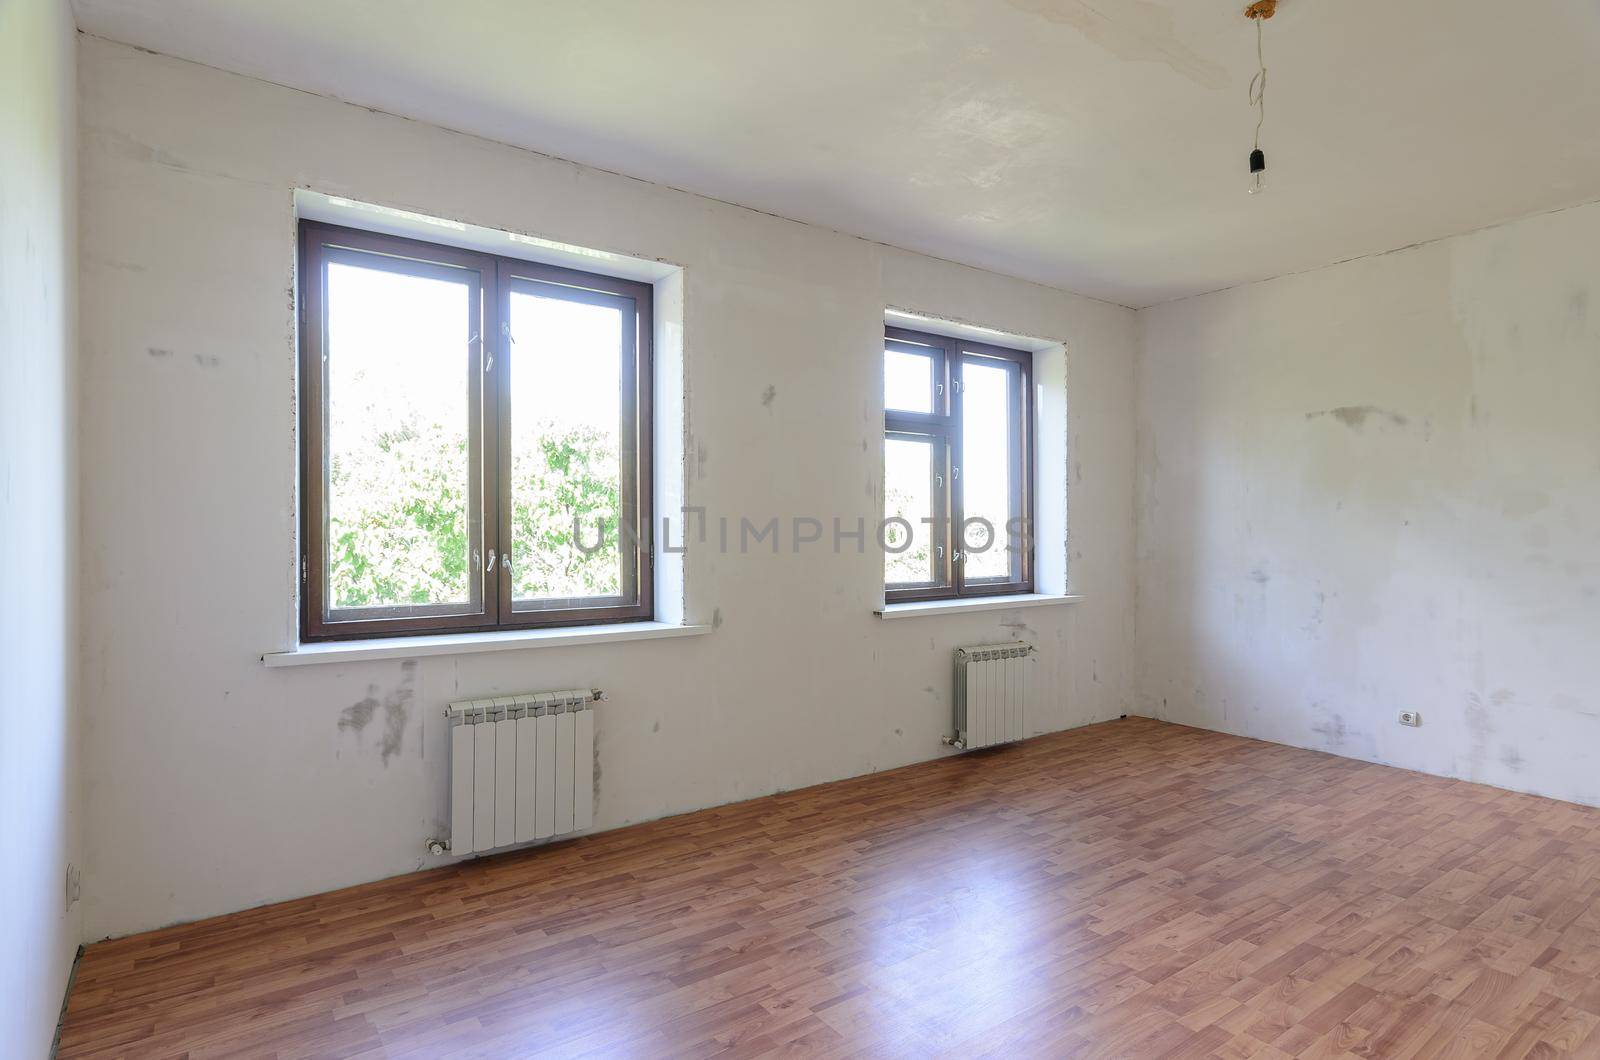 The interior of an empty room during renovation, there are two large windows in the room, radiators under them a